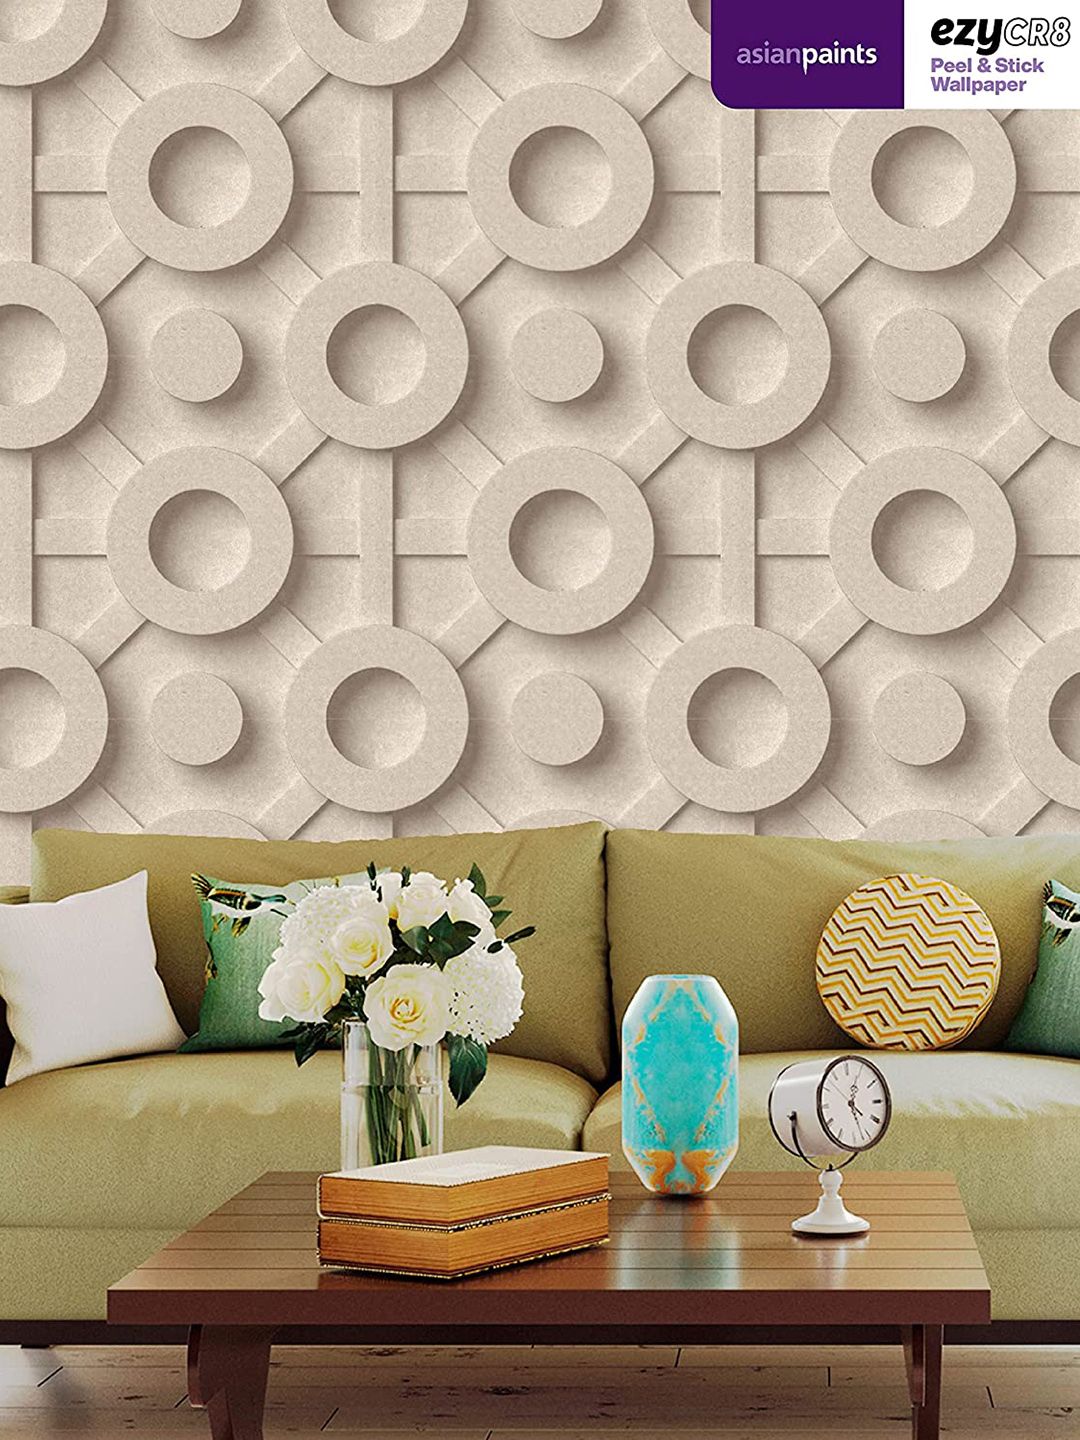 Asian Paints Beige Textured Circles Self Adhesive Wallpaper Price in India